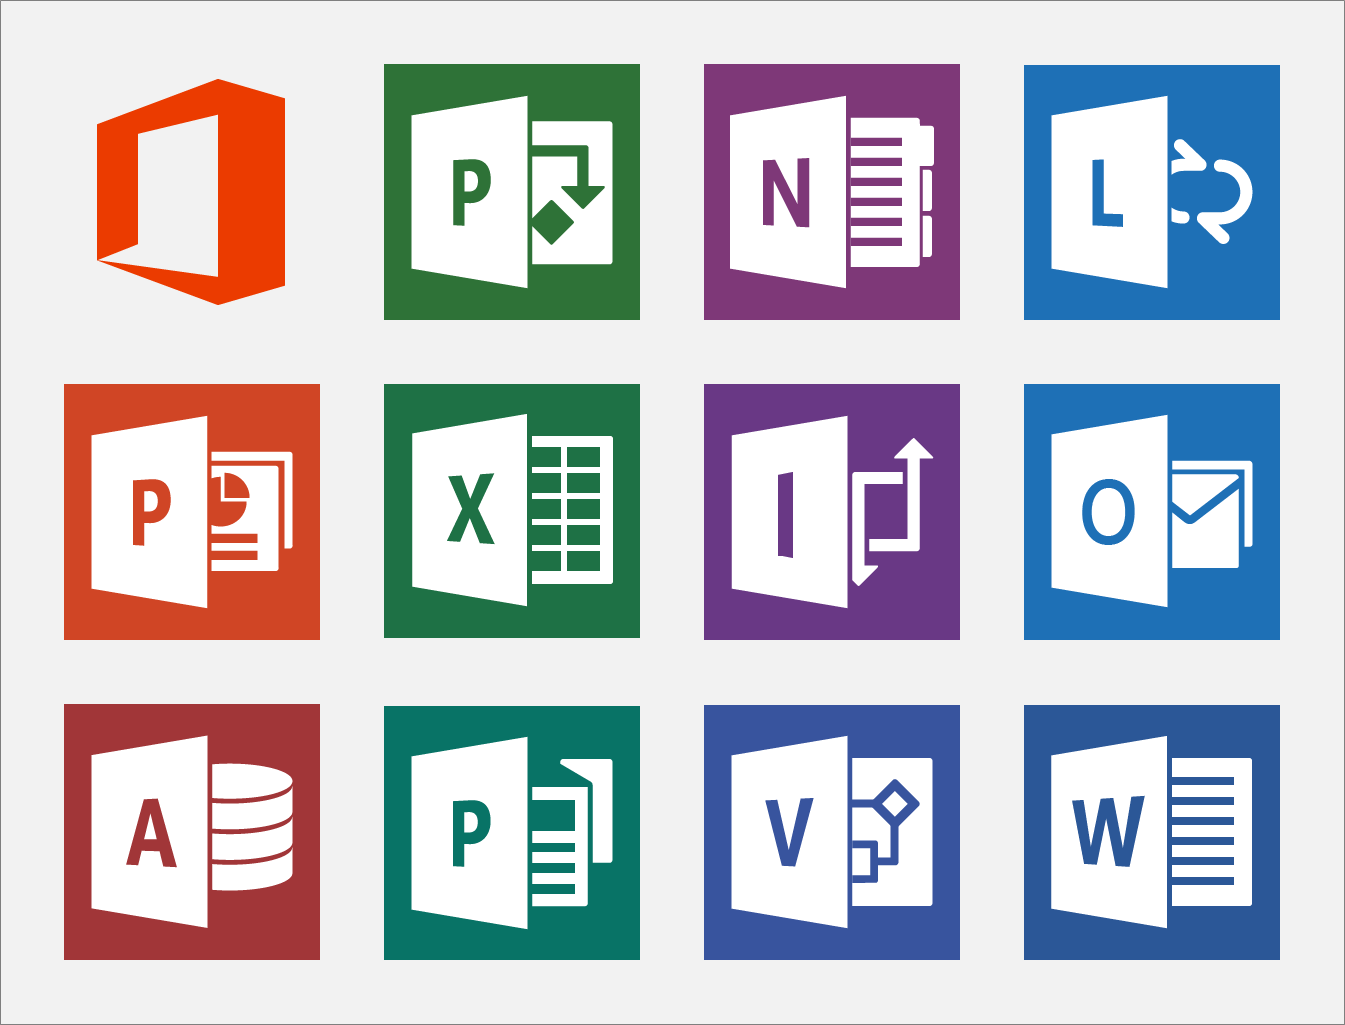 office 365 icons